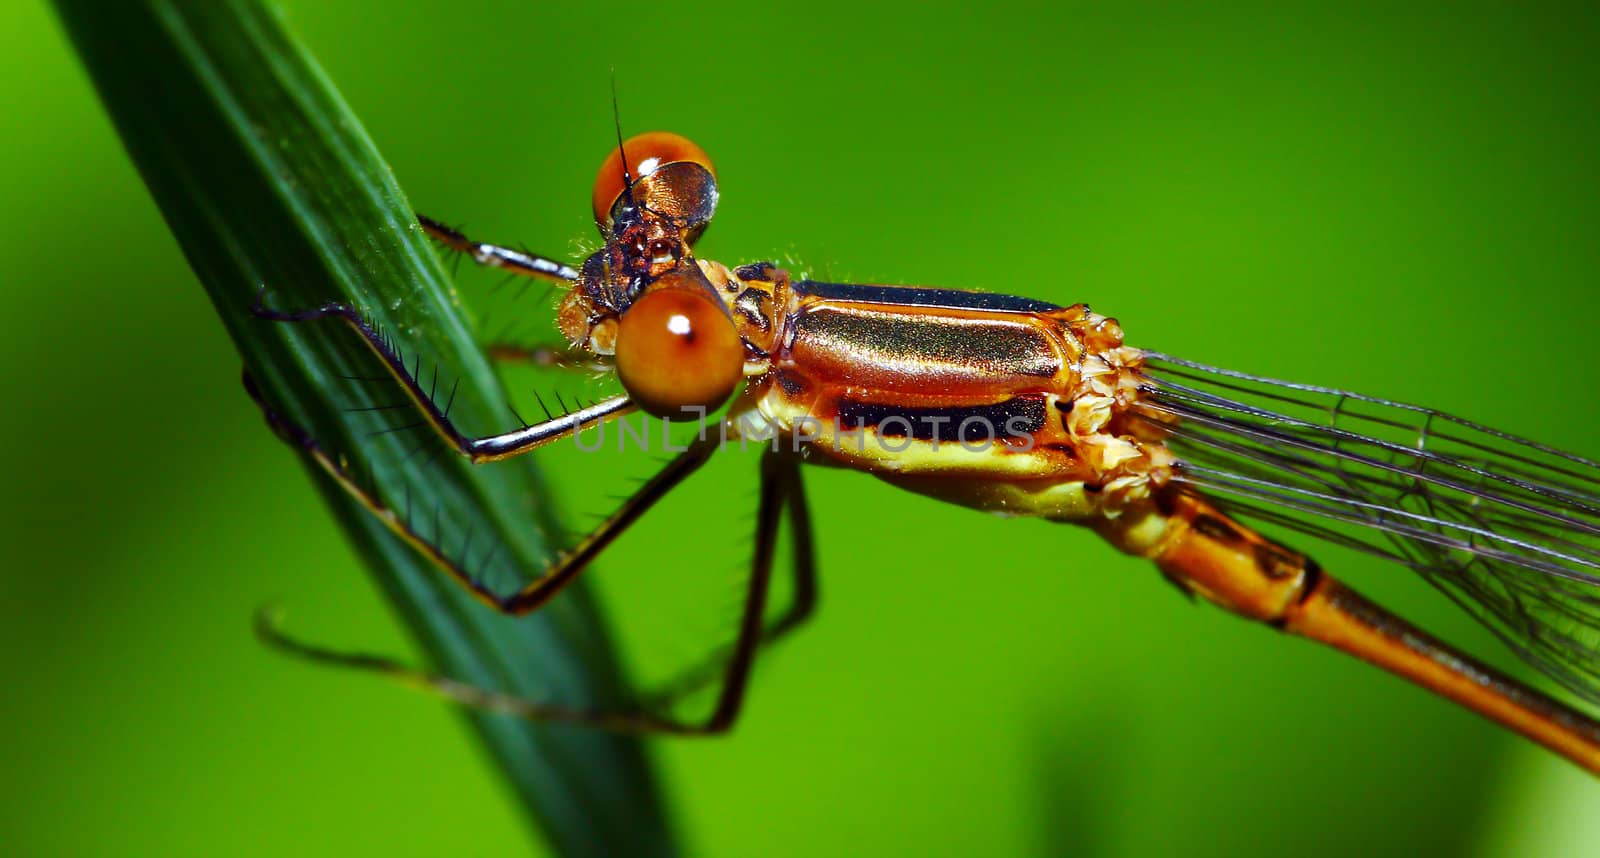 An orange Damselfly perched on a blade of grass.